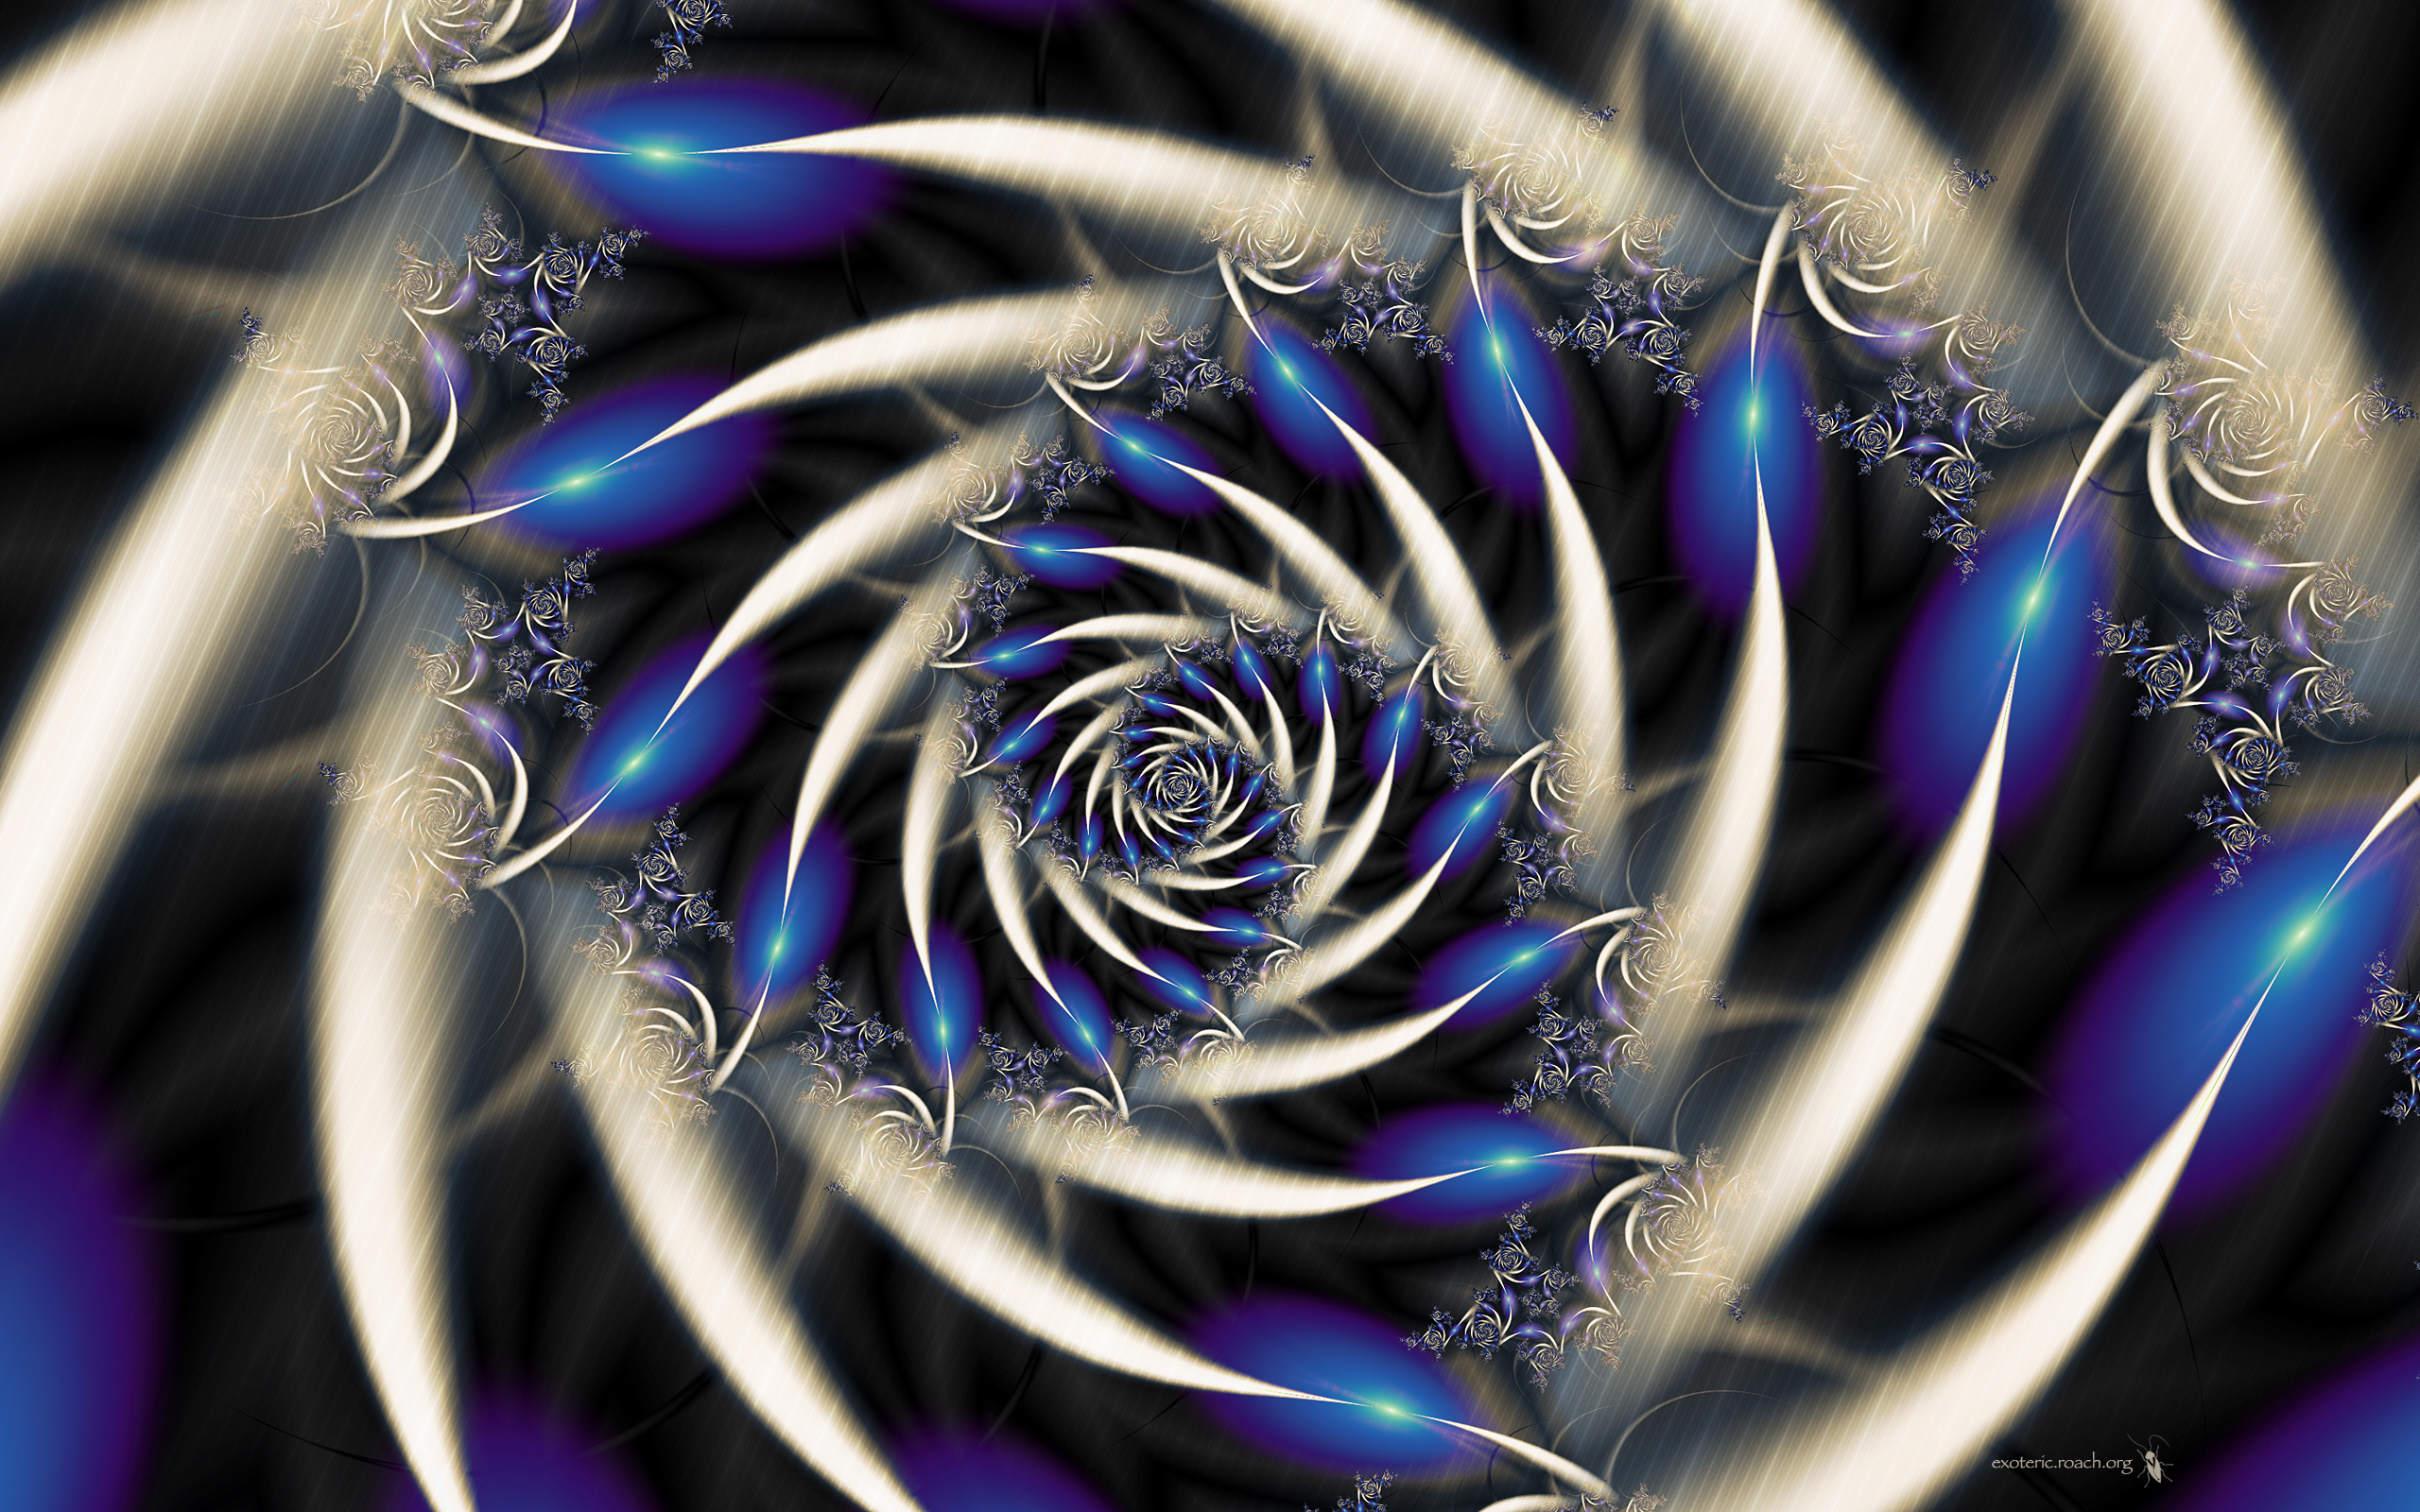 Fantastic Spiral wallpaper and image, picture, photo